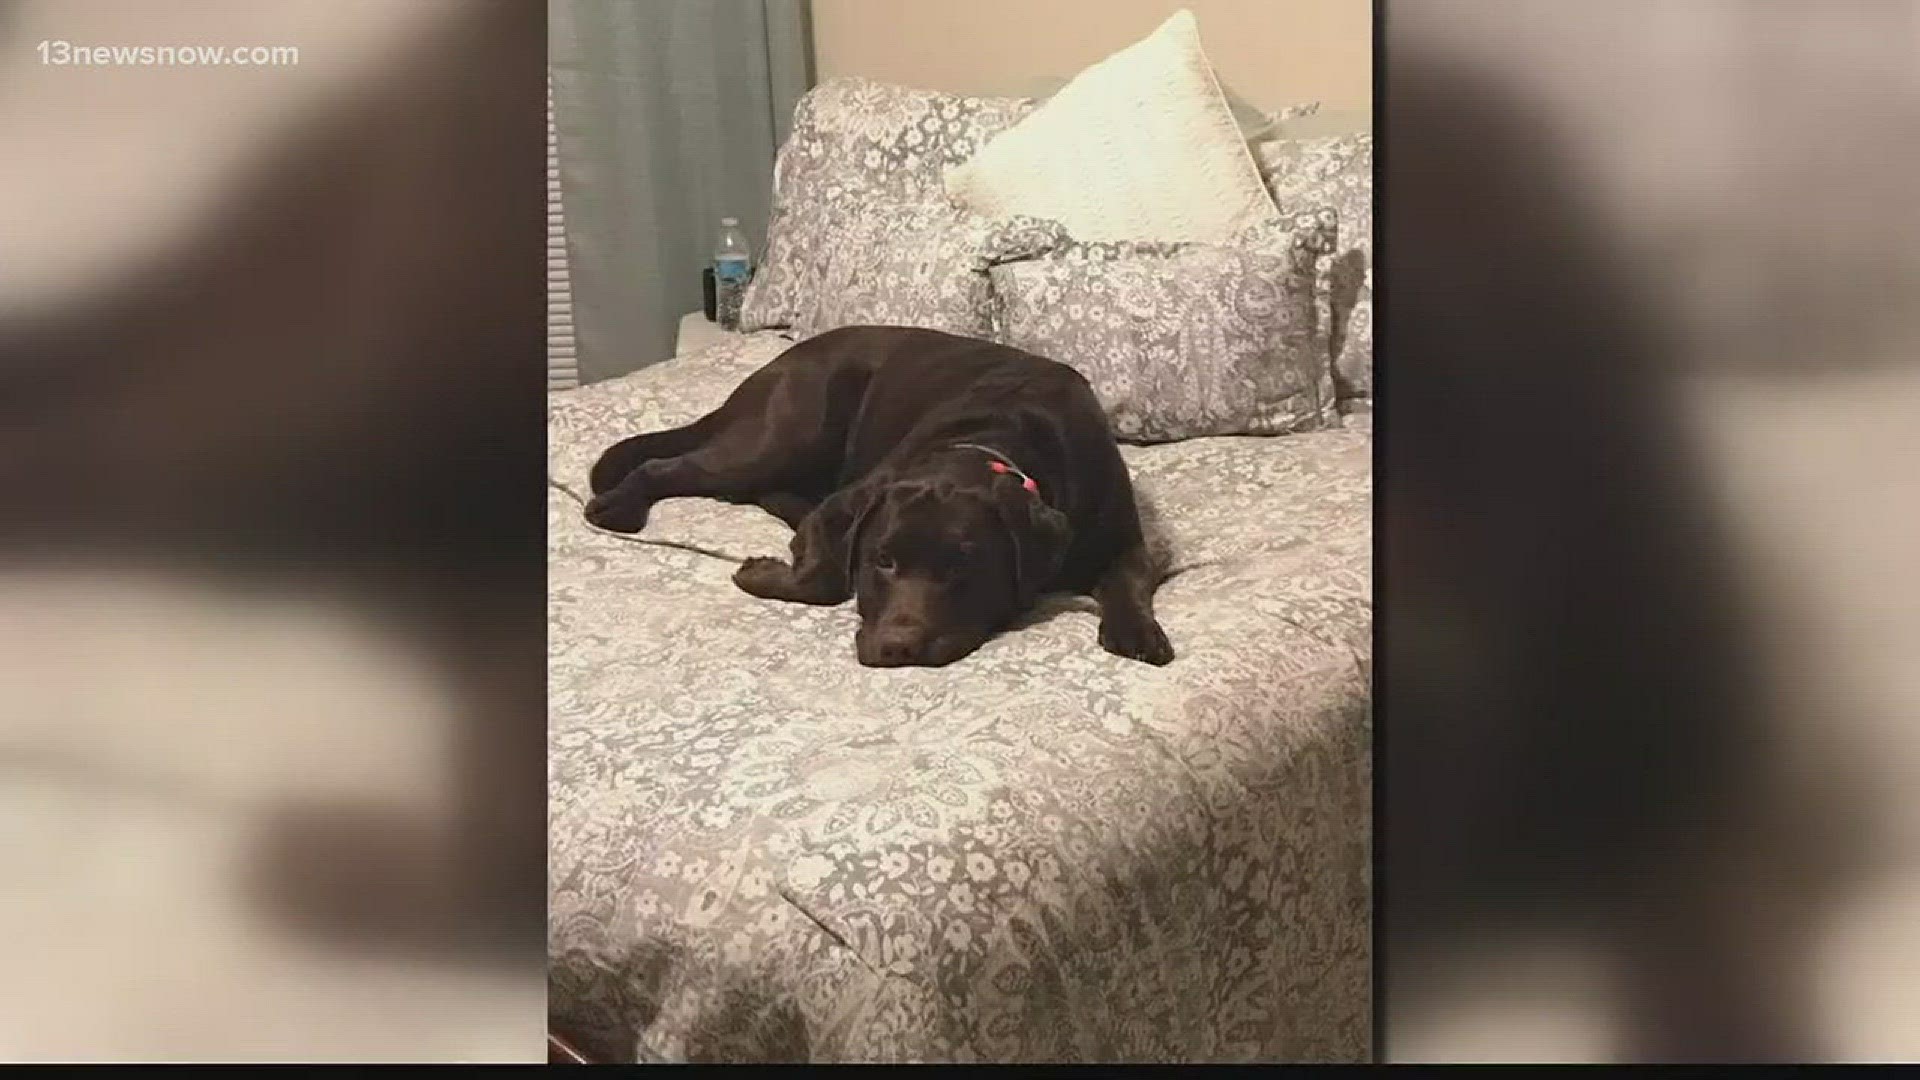 The dog vanished Sunday from his 'Isle of Wight' home